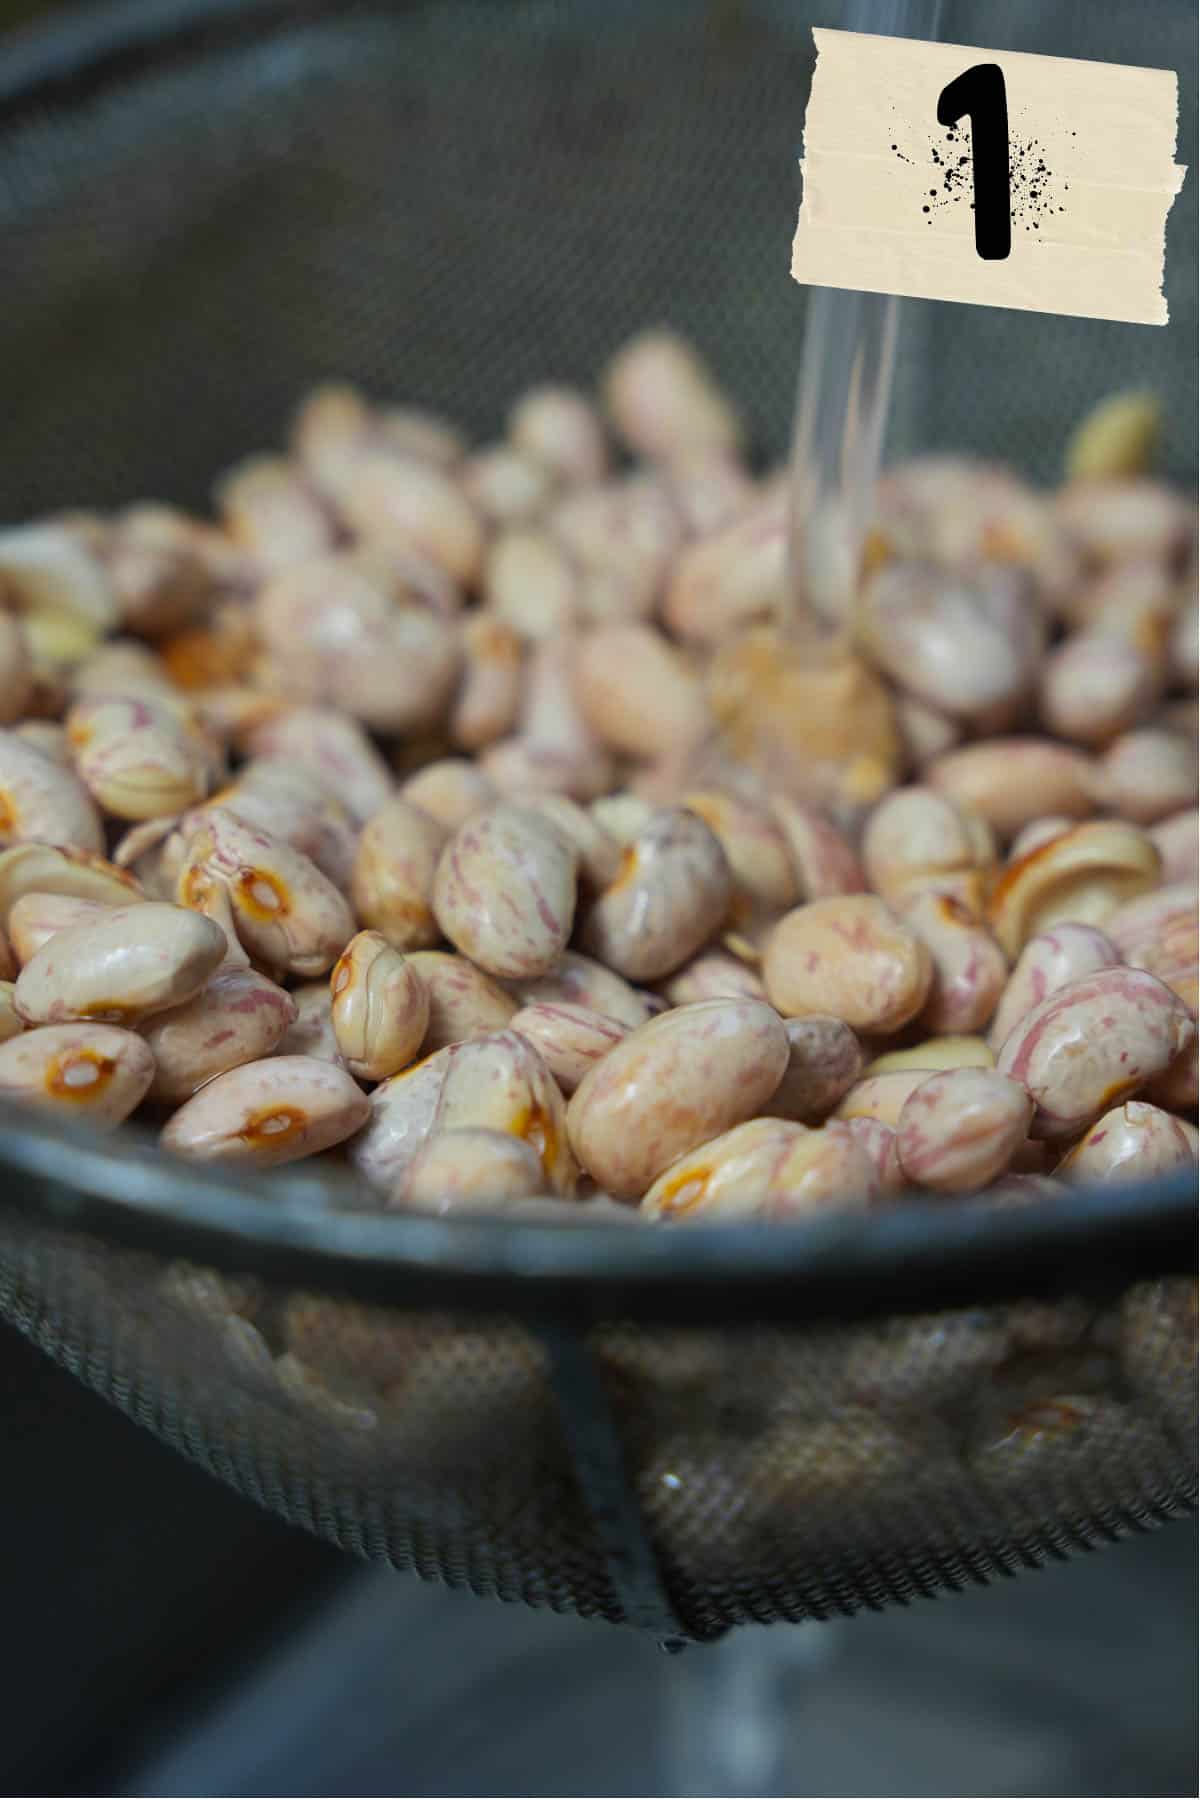 Soaked dried borlotti beans are strained and rinsed in a wire mesh strainer.